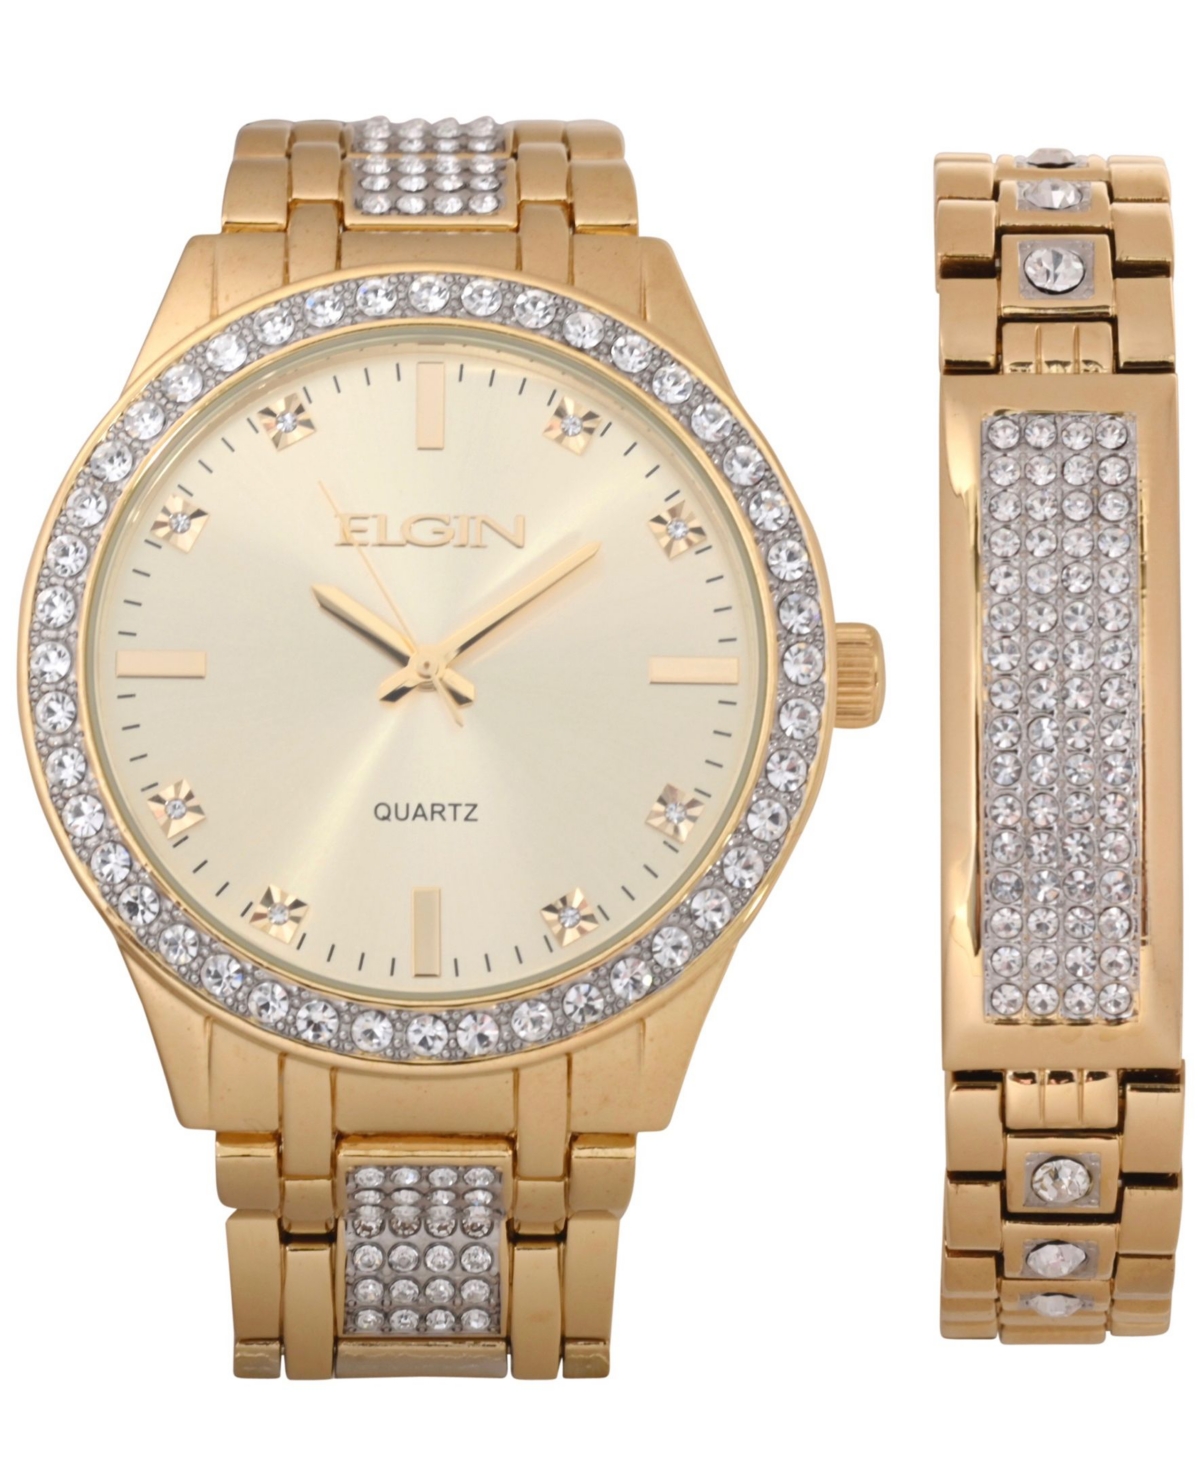 Men's Ipg Two-Tone Strap Watch and Matching Bracelet Set - Two-Tone